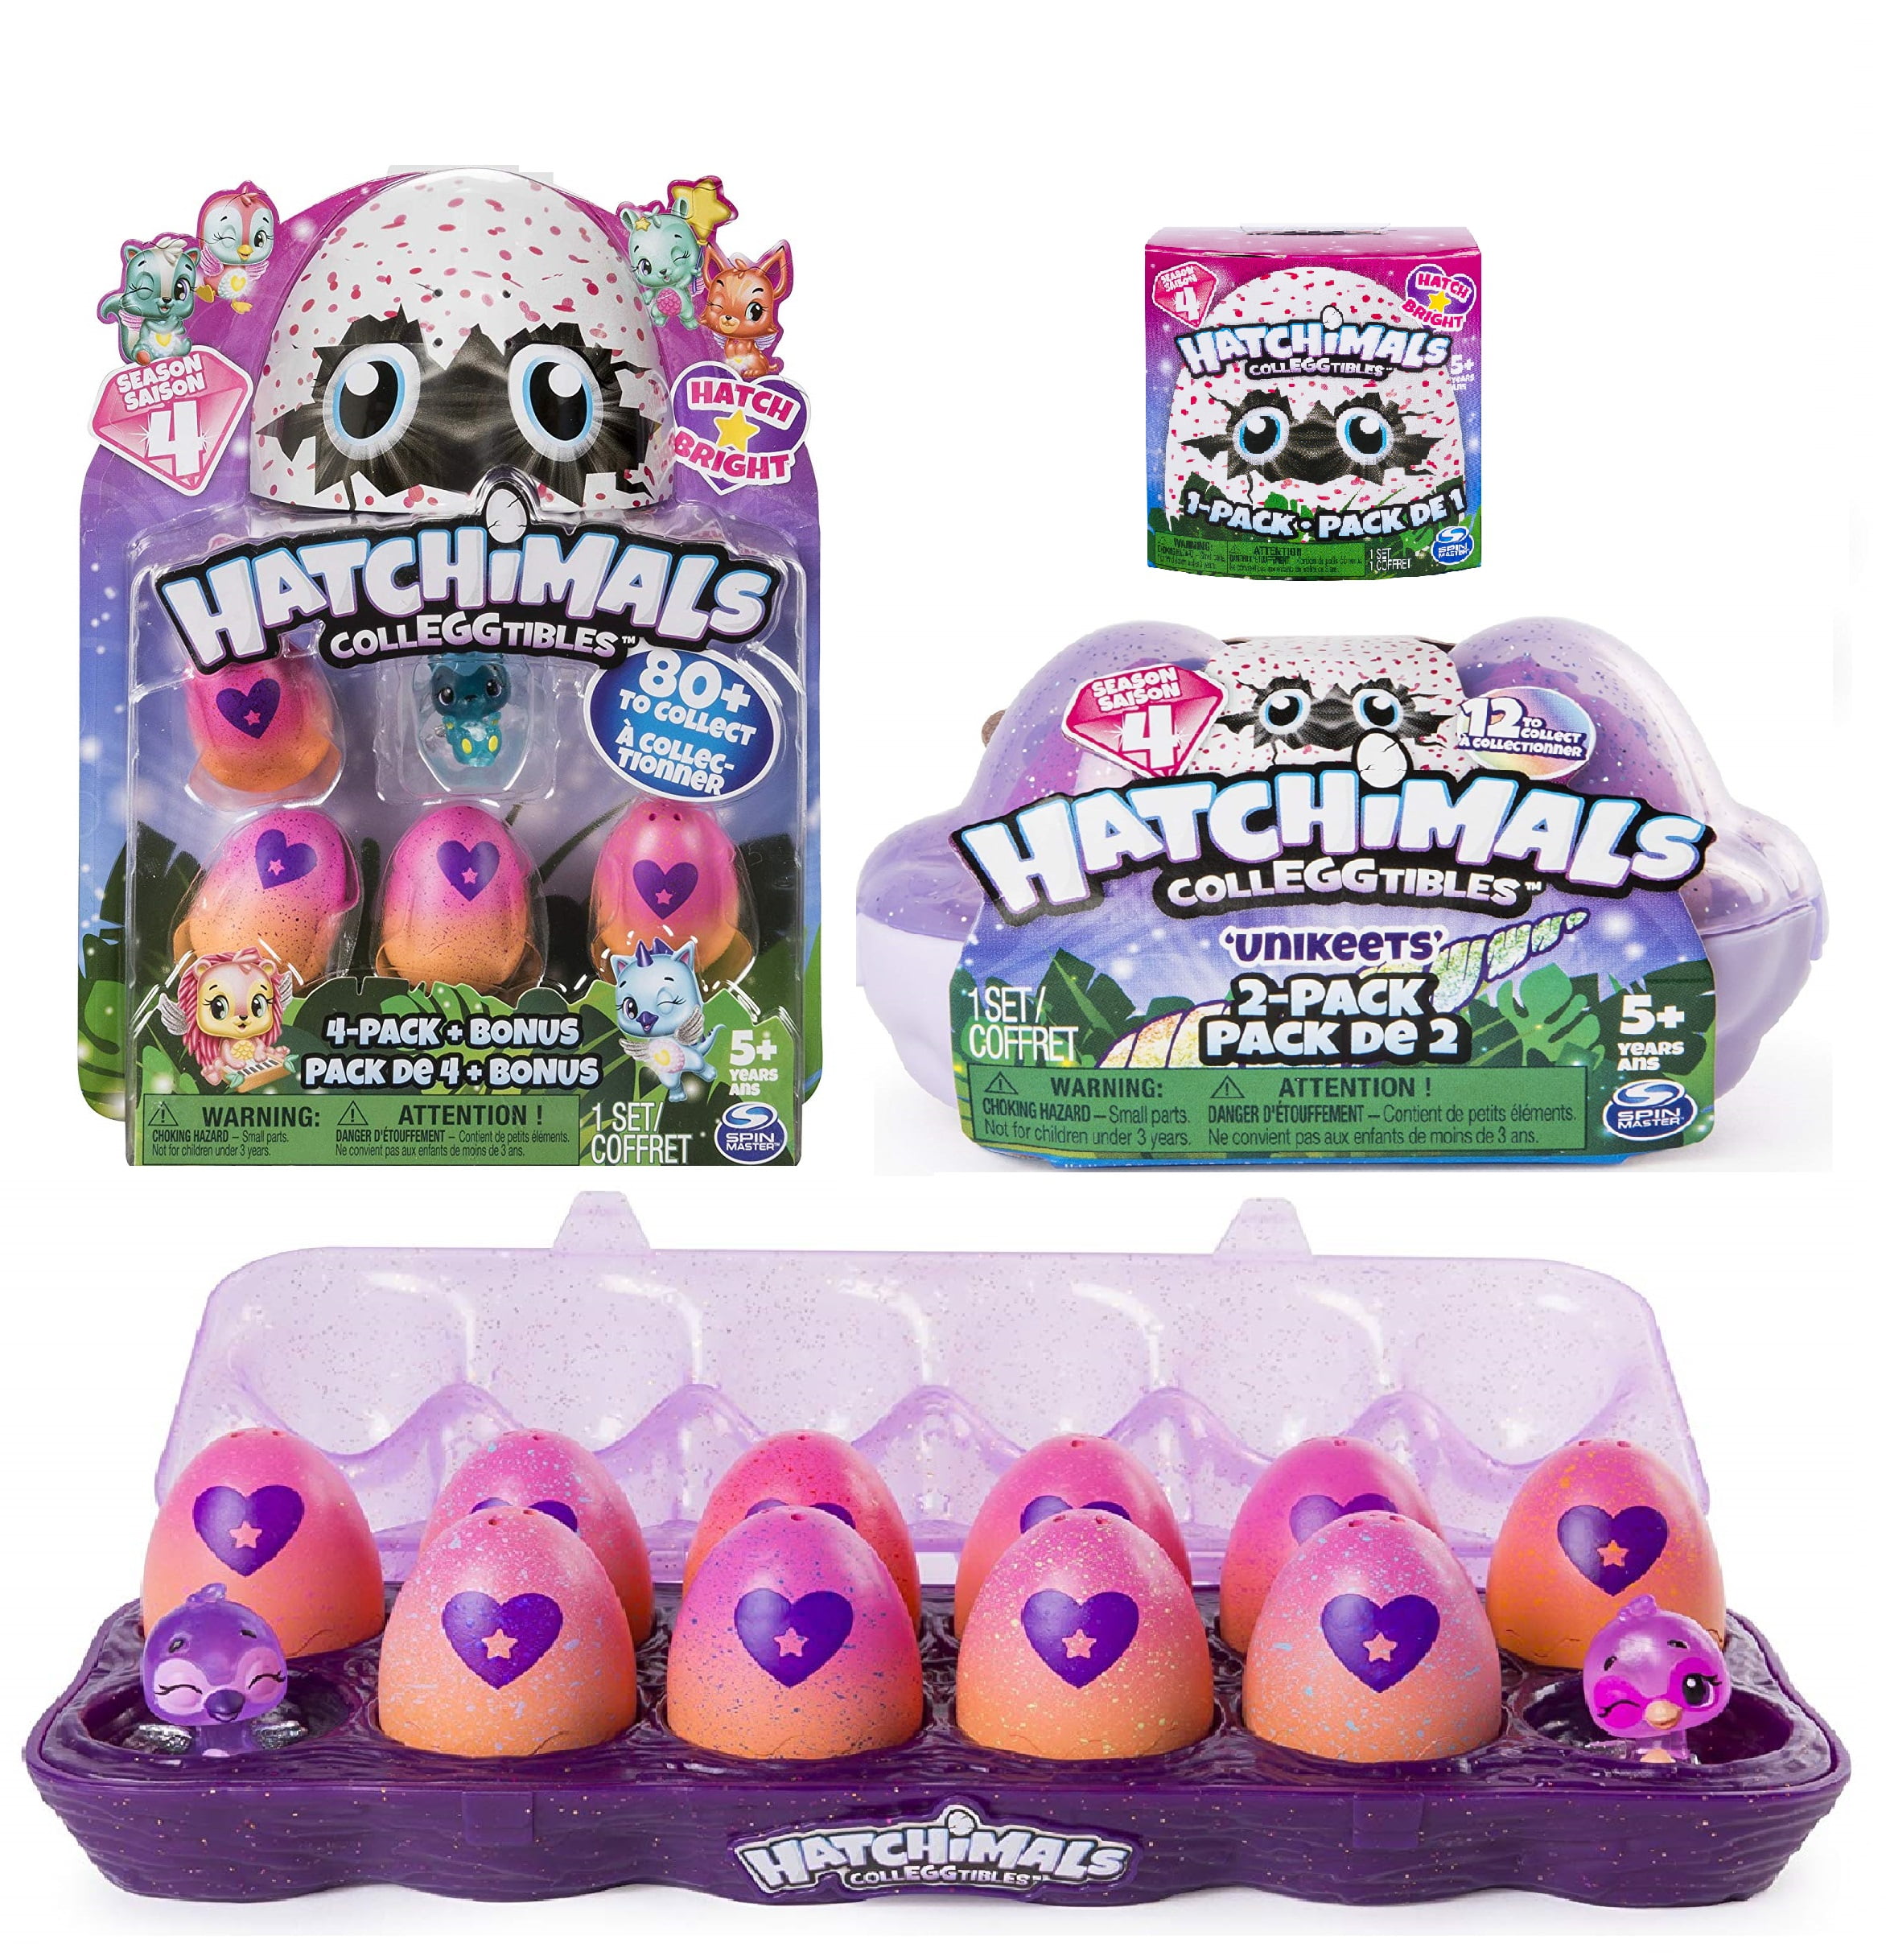 6x Hatchimals Colleggtibles Season 4 Hatch Bright Mystery 1-pack for sale online 